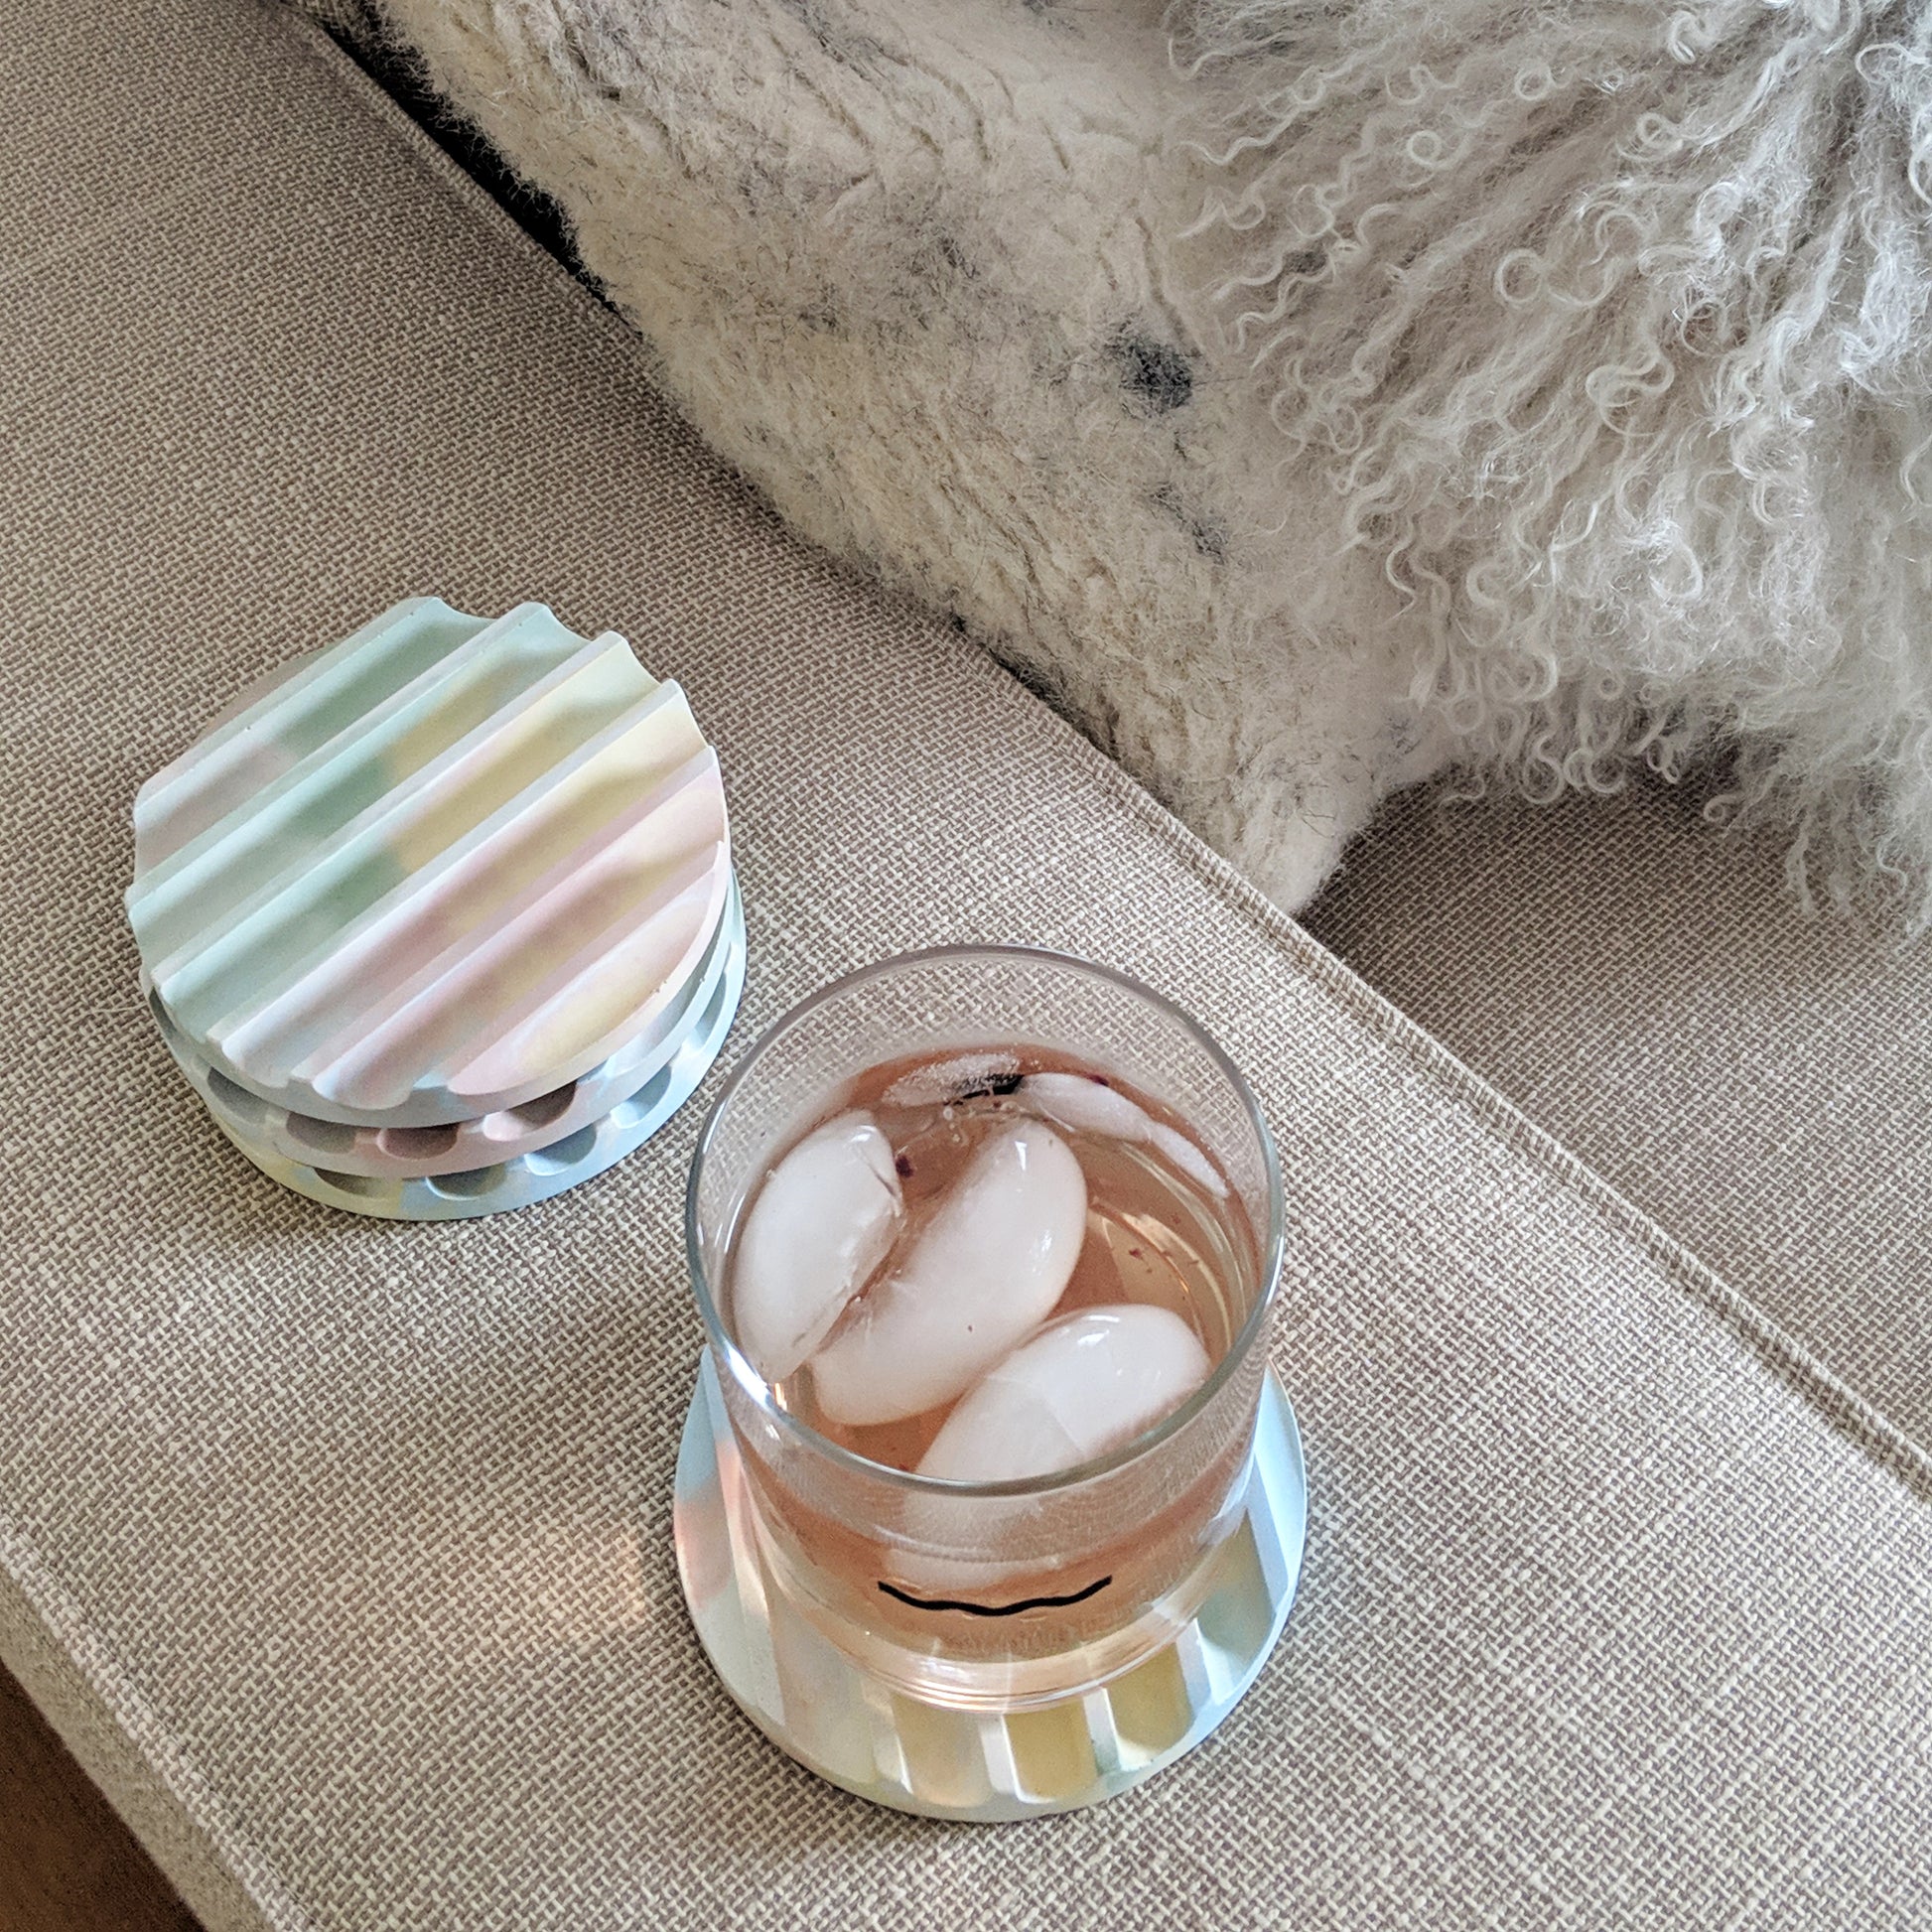 Concrete coaster set with cork base in jawbreaker (multicolor) shown with drink.